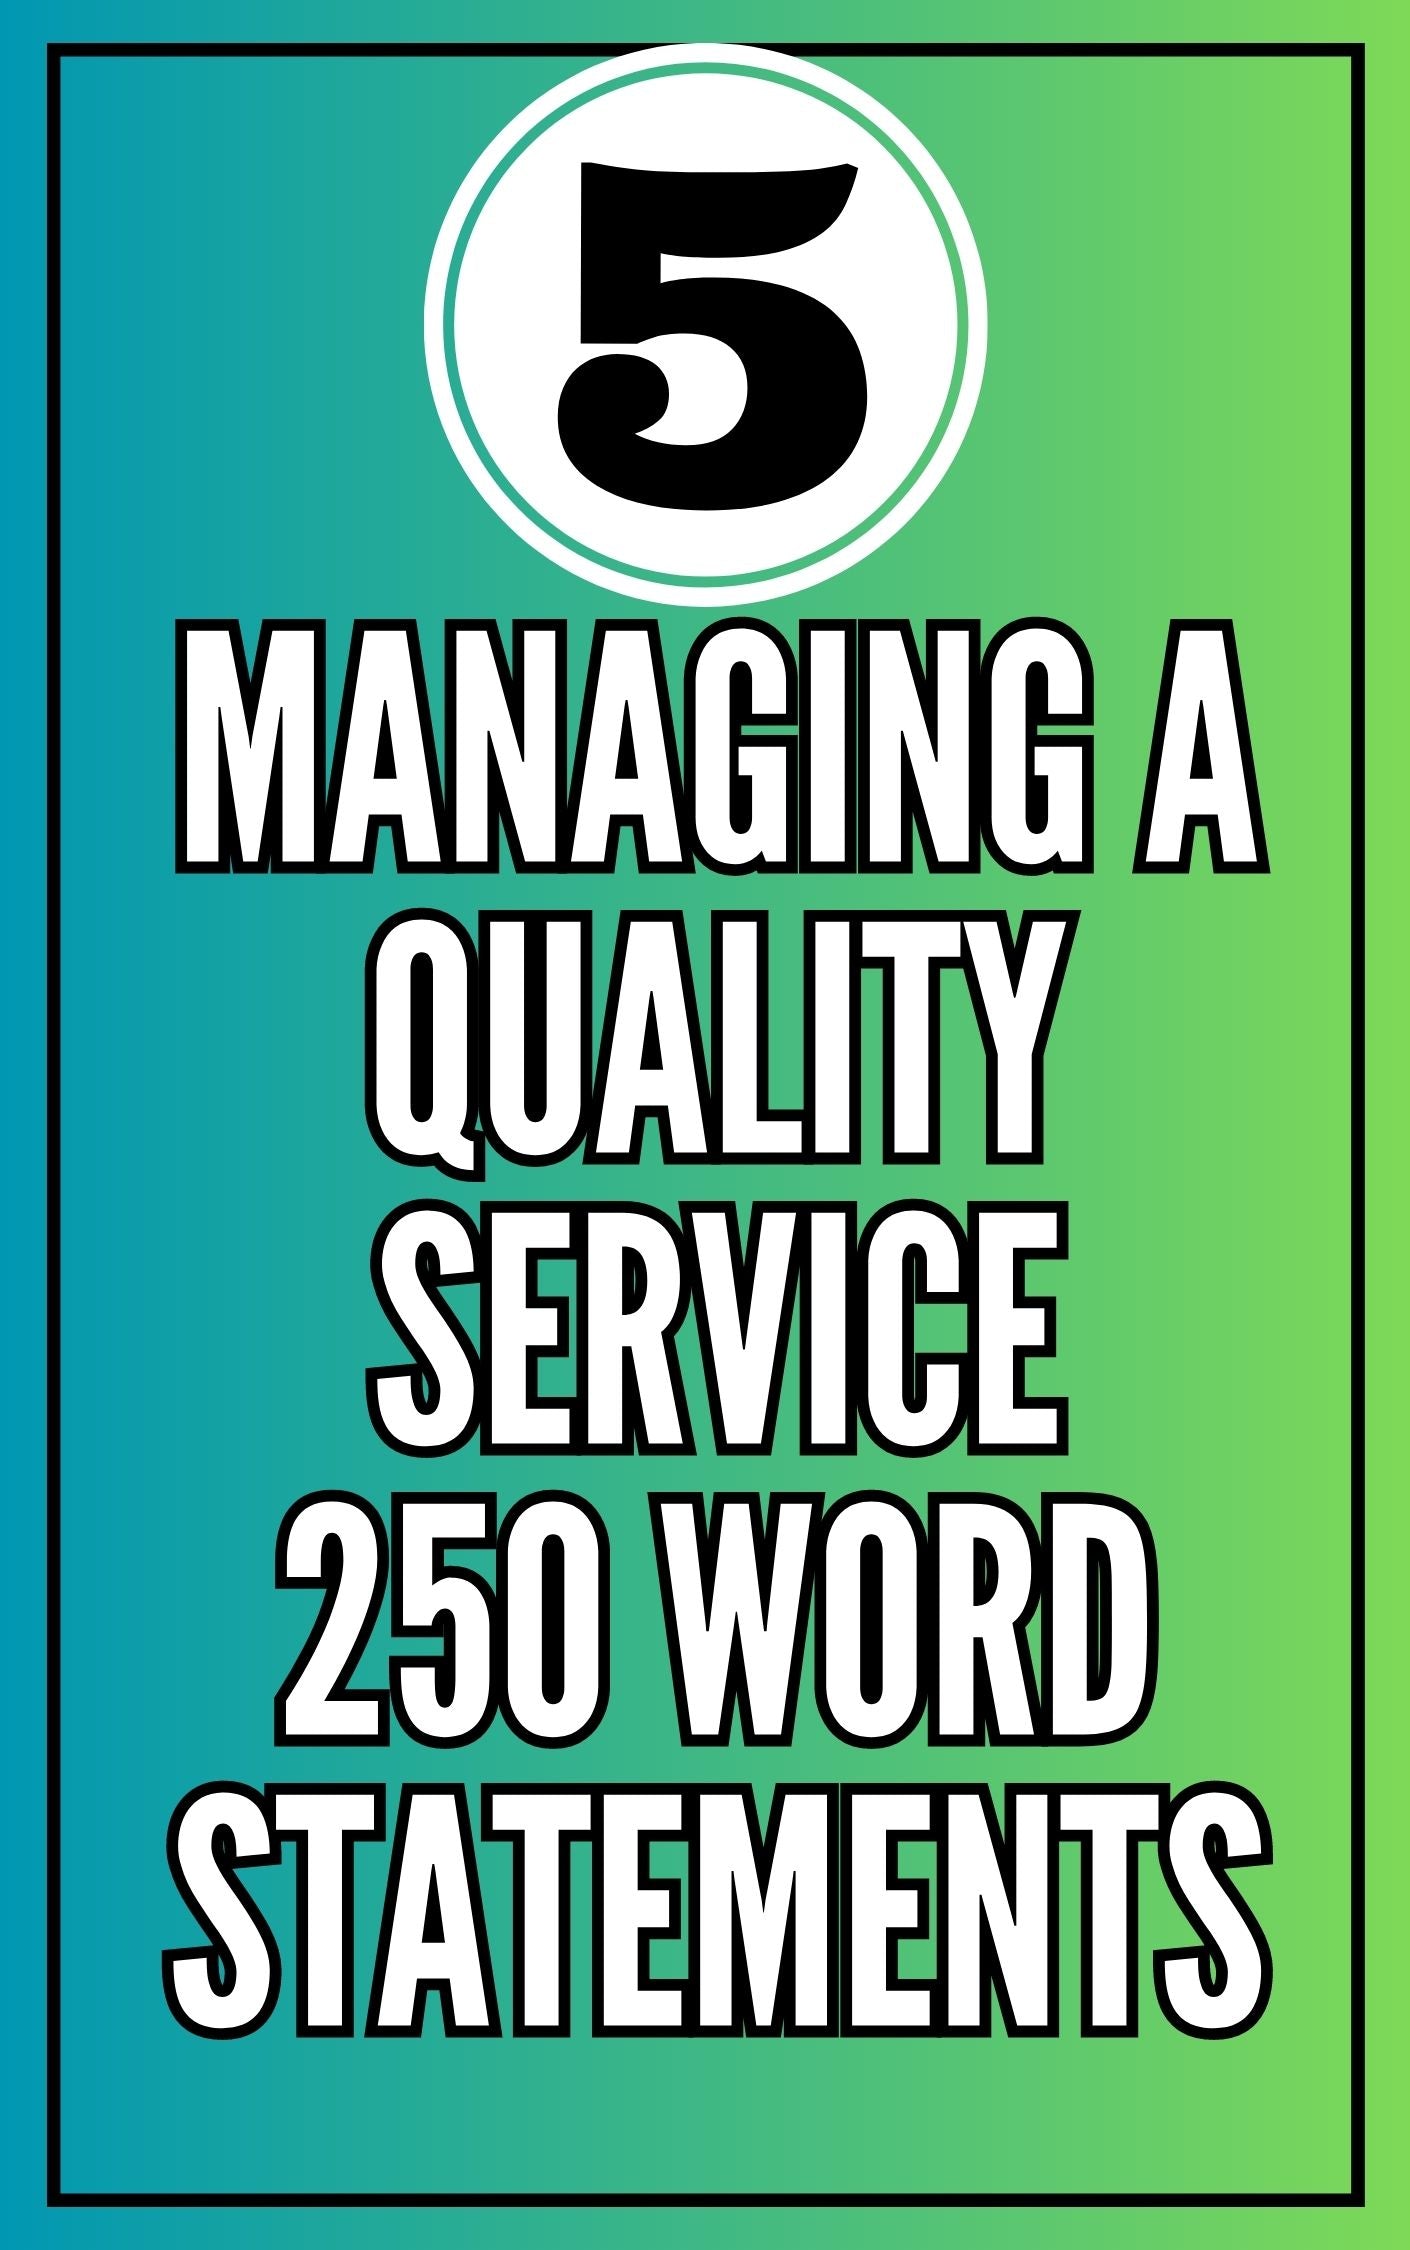 'Managing a Quality Service' - 250 Word Statement Examples